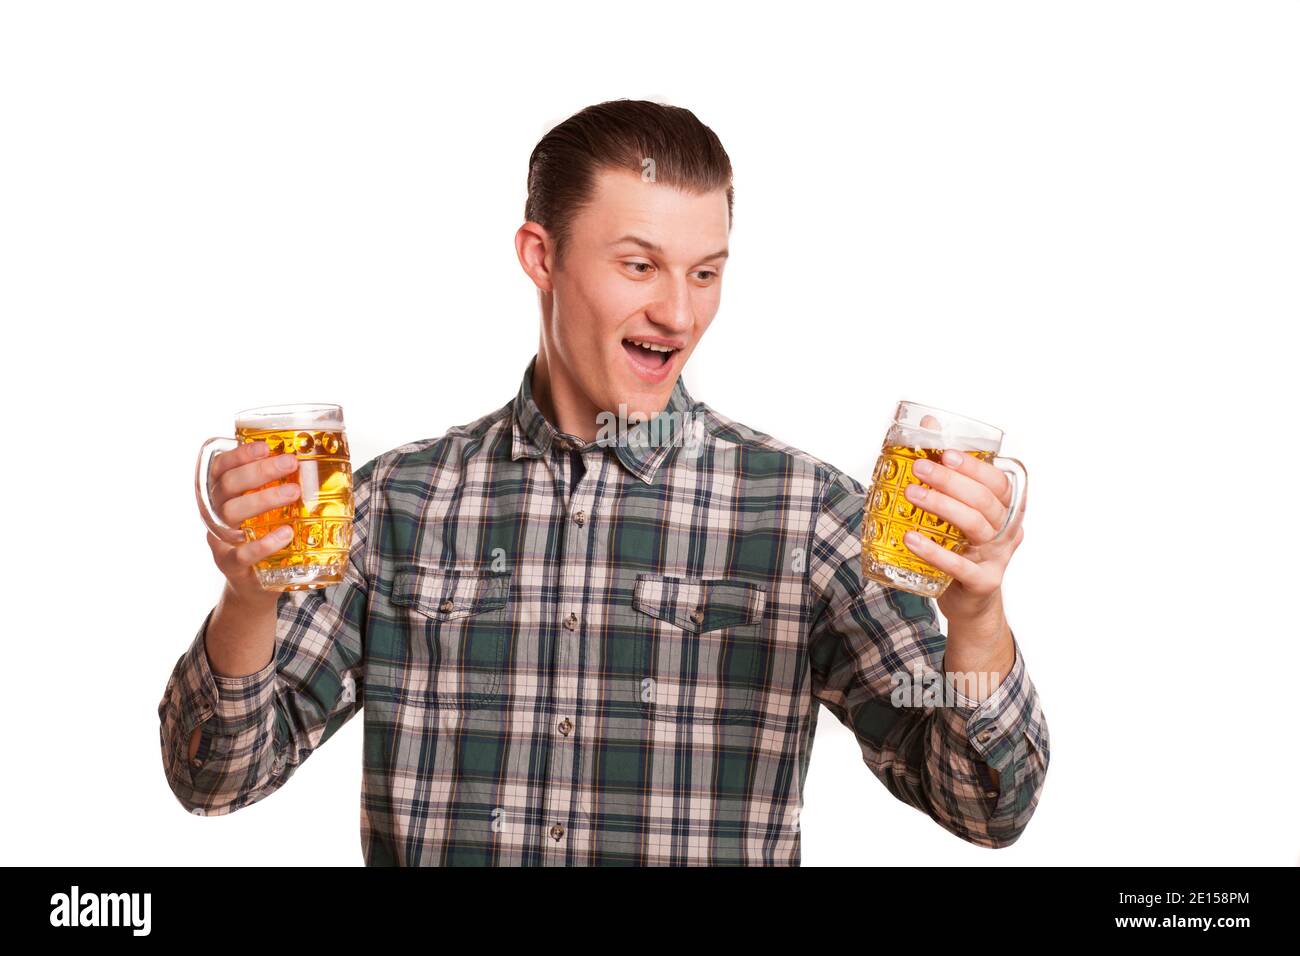 Handsome man looking excited holding two glasses of beer in his hands  isolated on white. Attractive happy man smiling joyfully, posing with drinks.  Re Stock Photo - Alamy